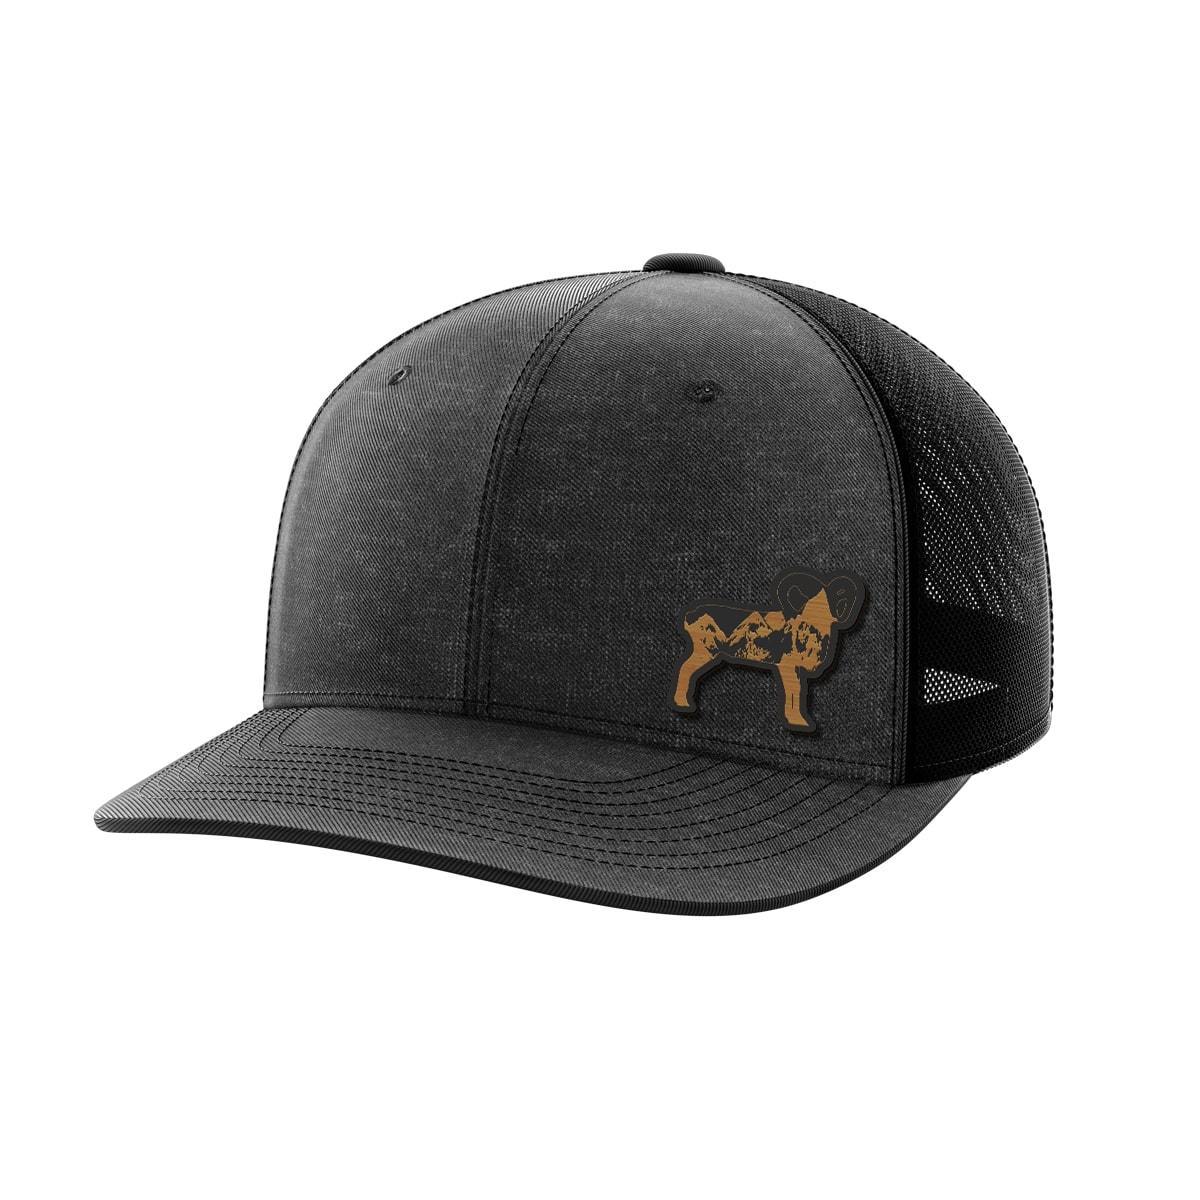 Ram Bamboo Patch Hat - Greater Half